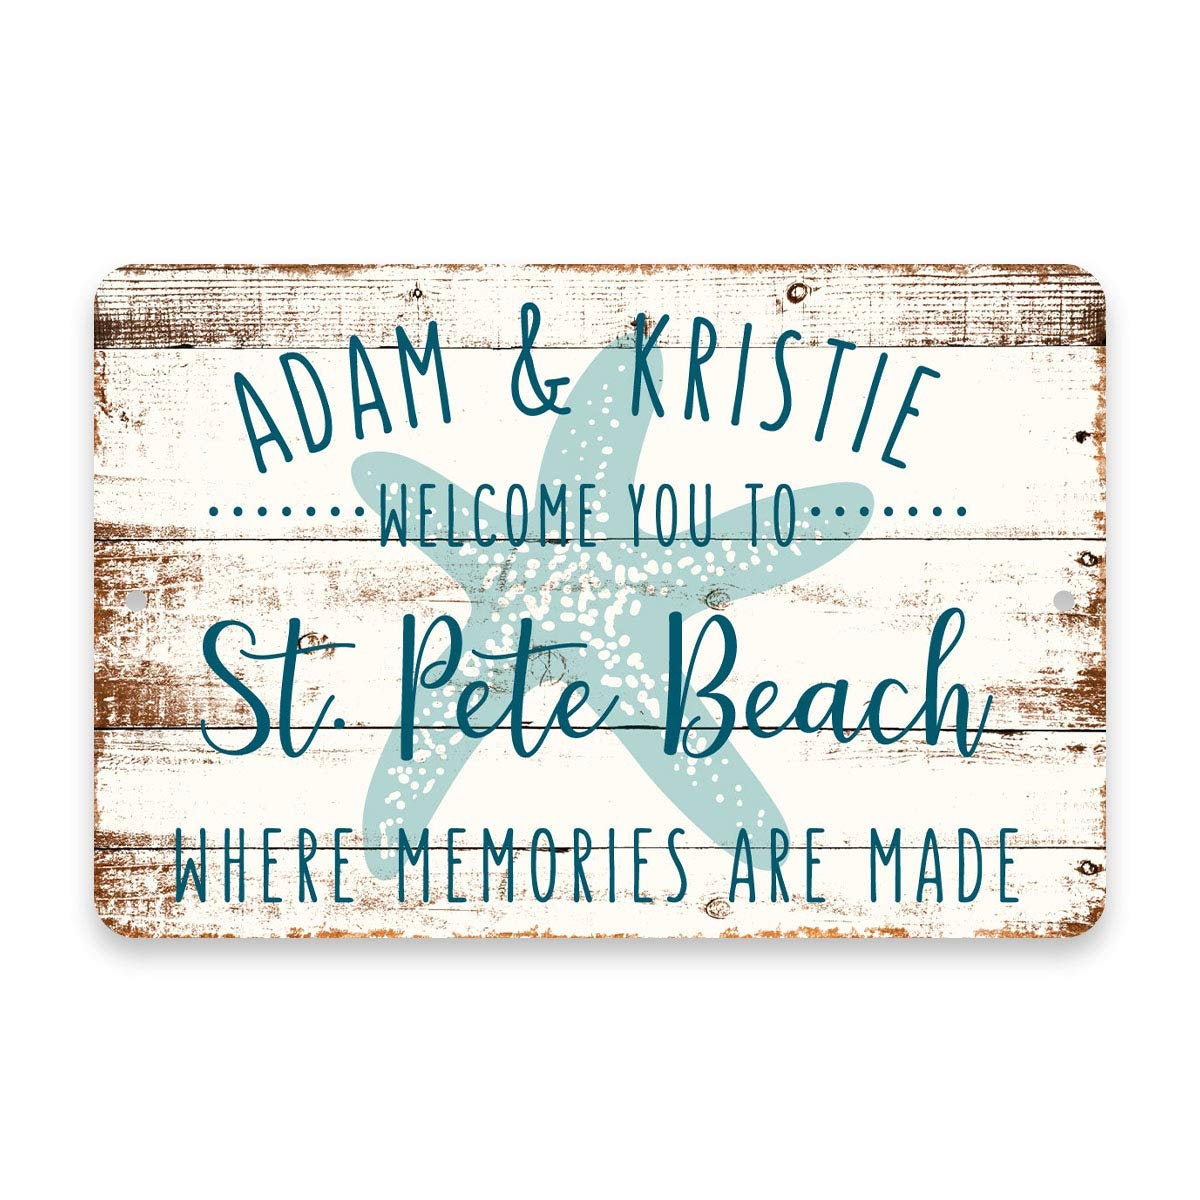 Personalized Welcome to St. Pete Beach Where Memories are Made Sign - 8 X 12 Metal Sign with Wood Look